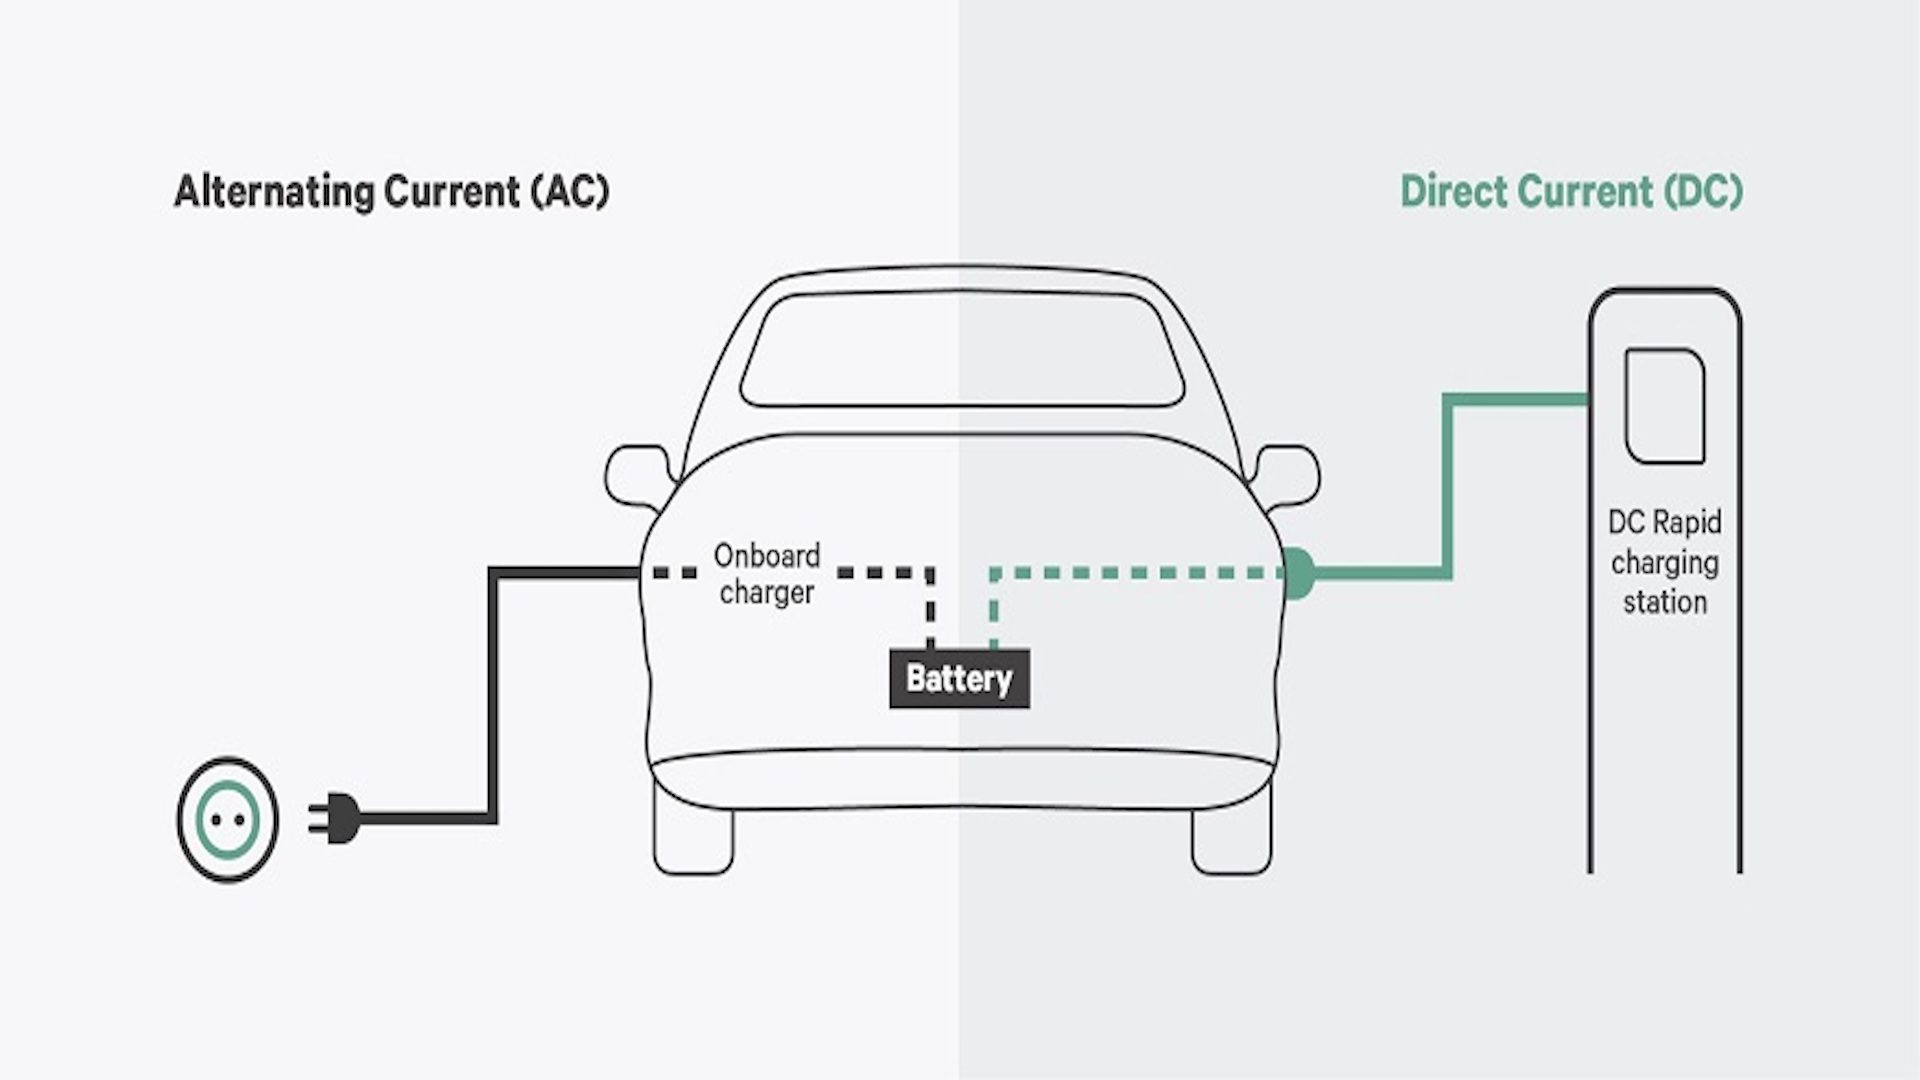 Bidirectional charging with AC and DC